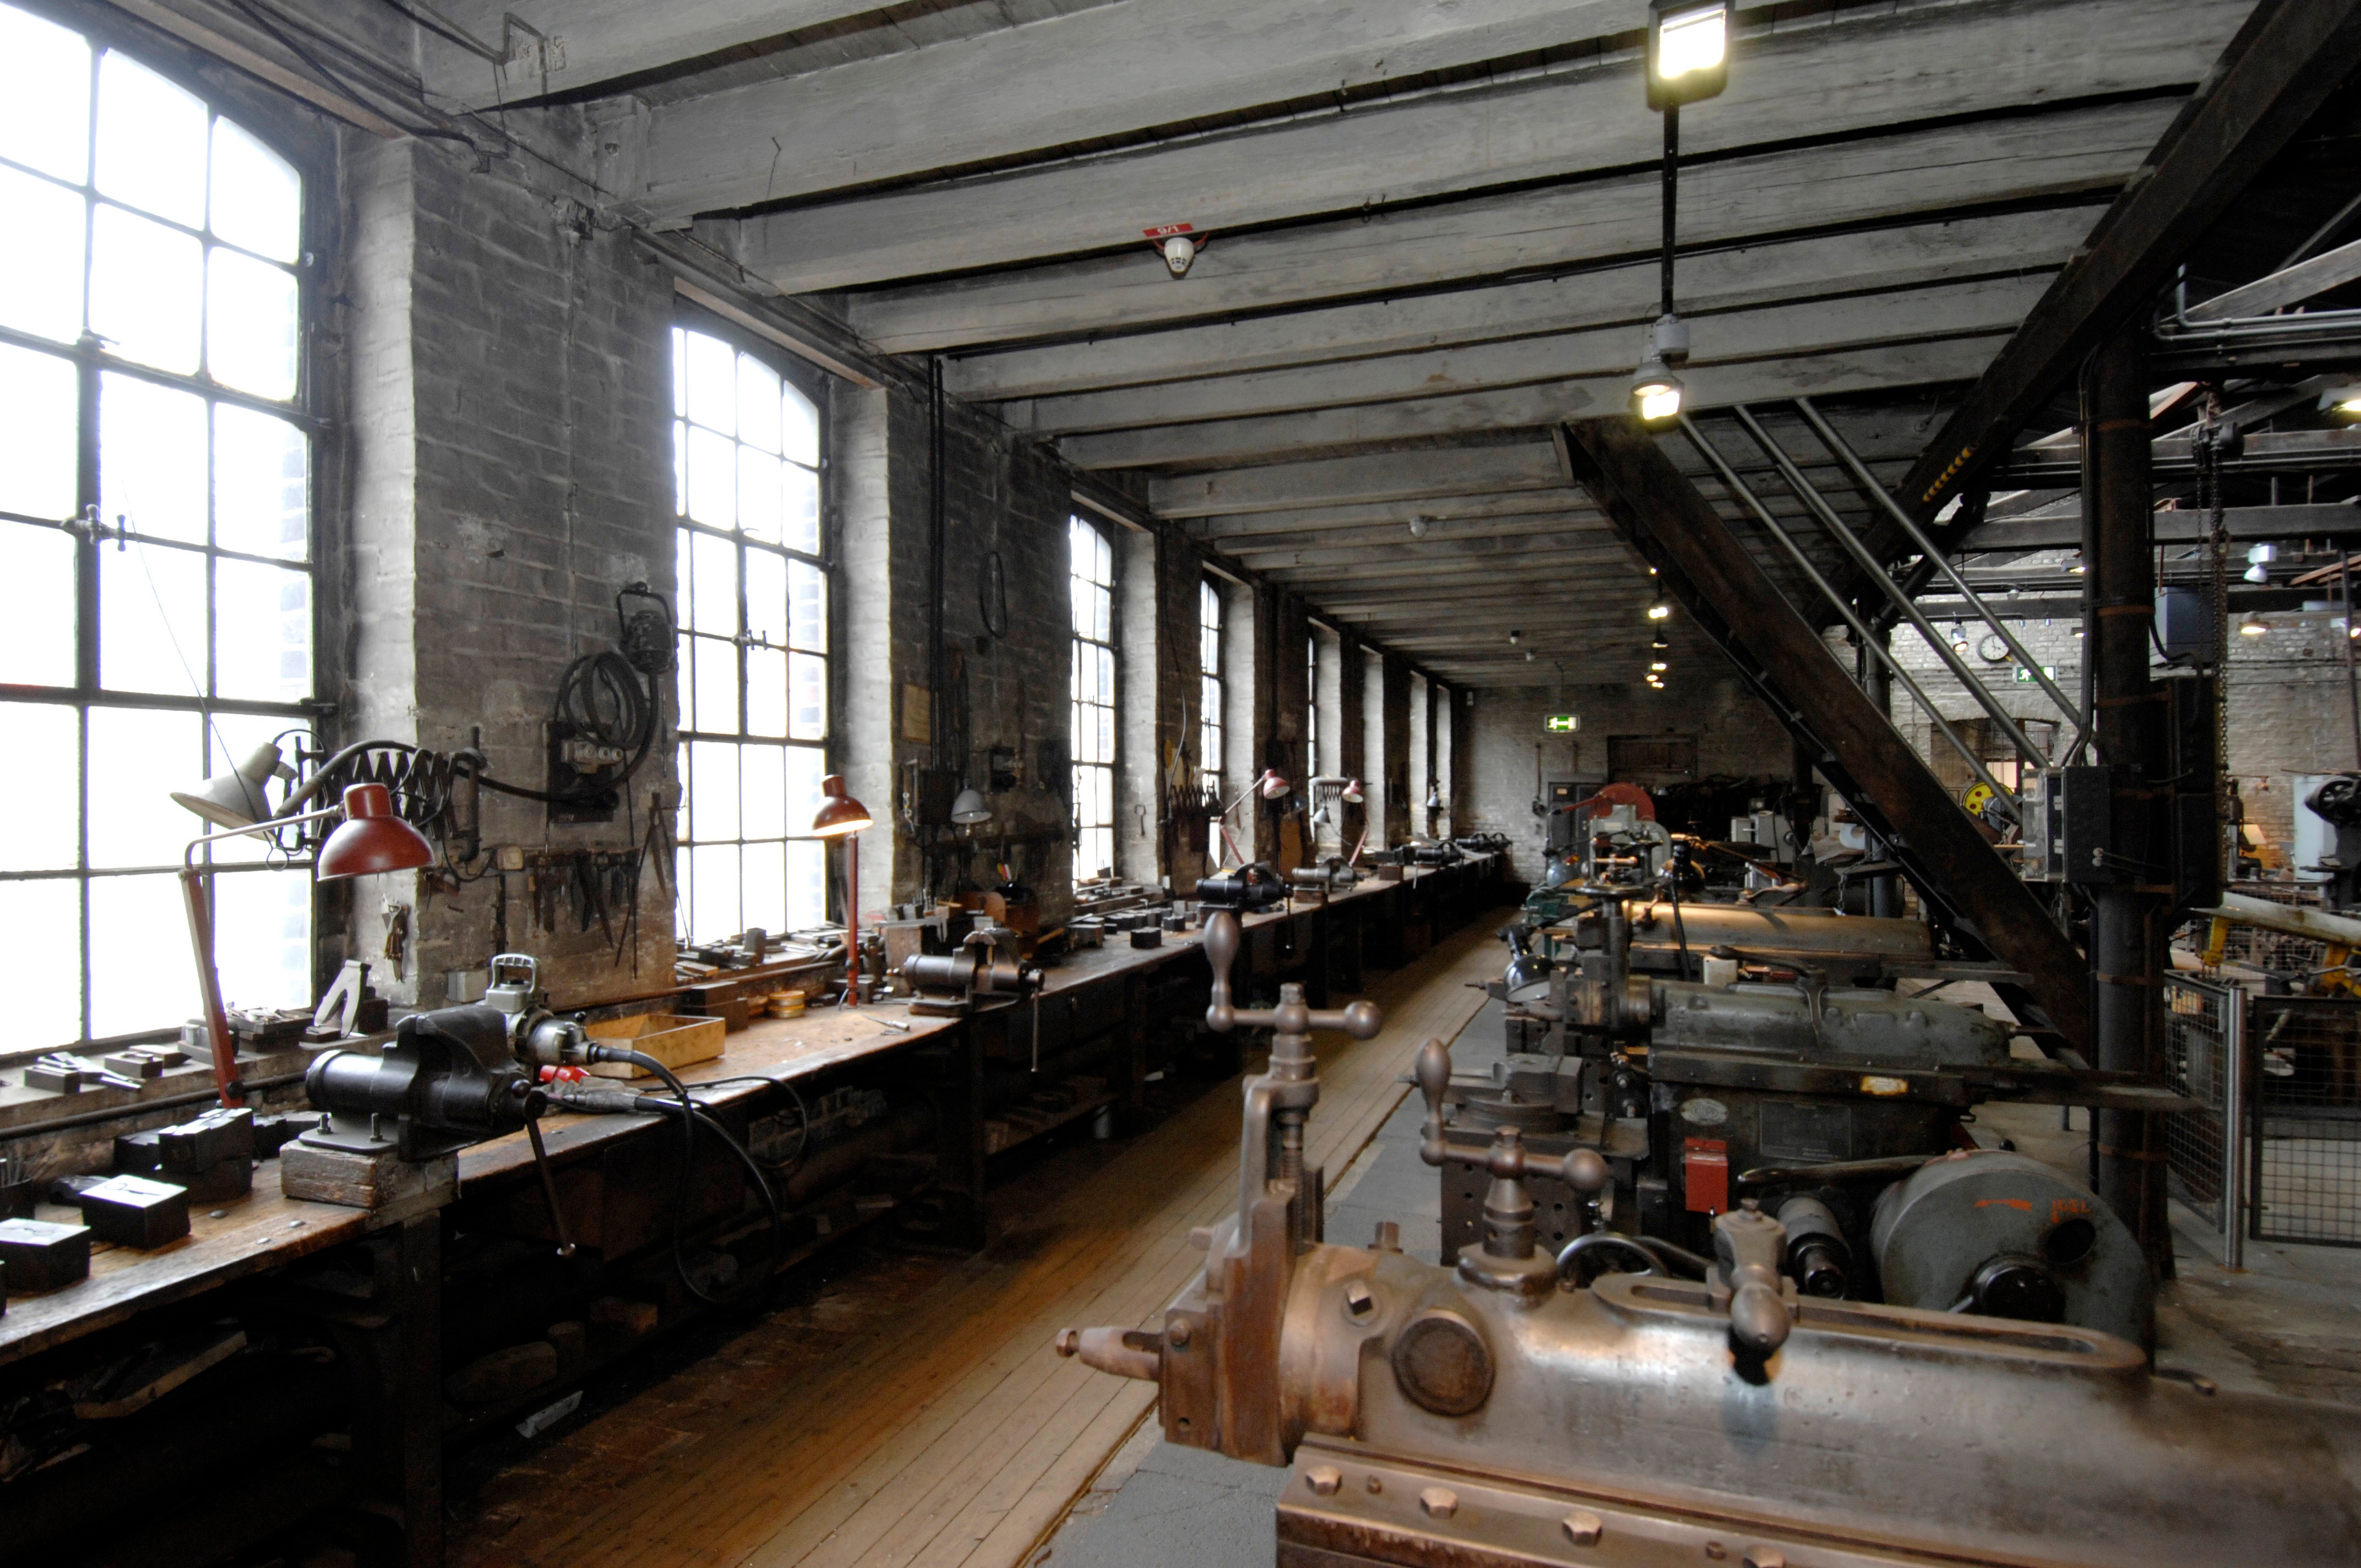 View into the tool shop. This is where the forging and cutting tools are made for scissor production.